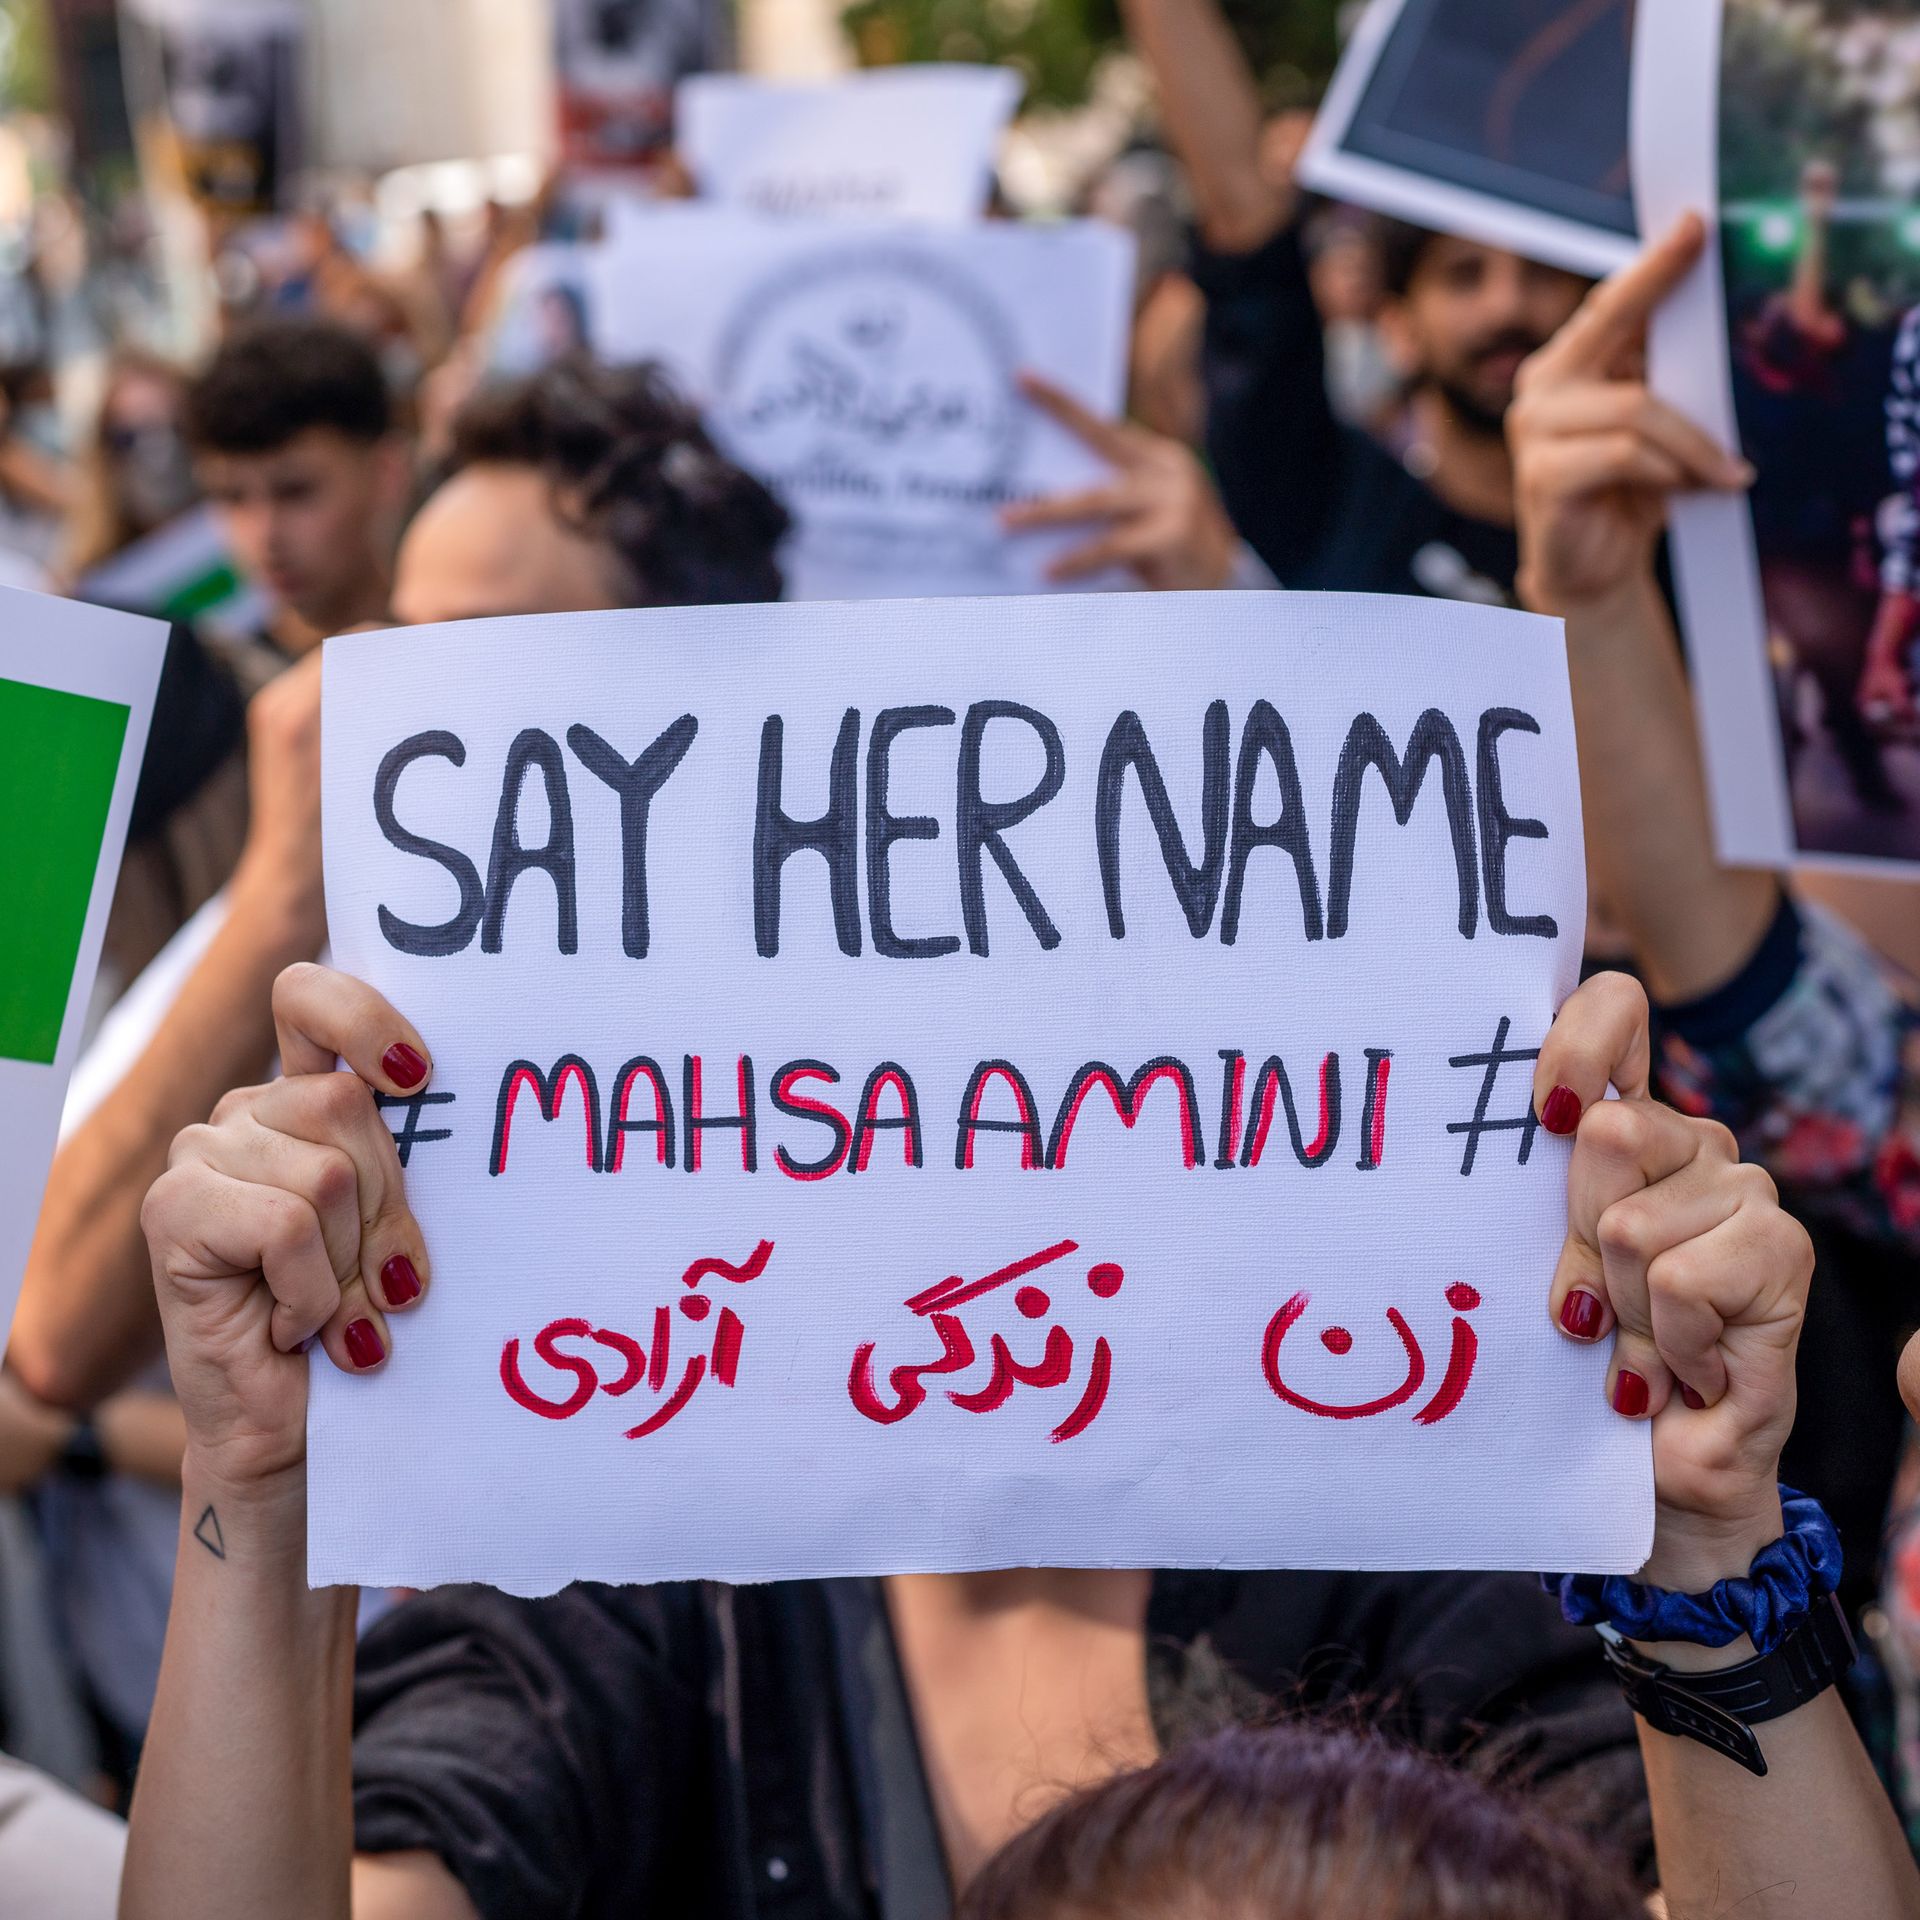 Protester holding a sign reading "Say her name: Mahsa Amini"